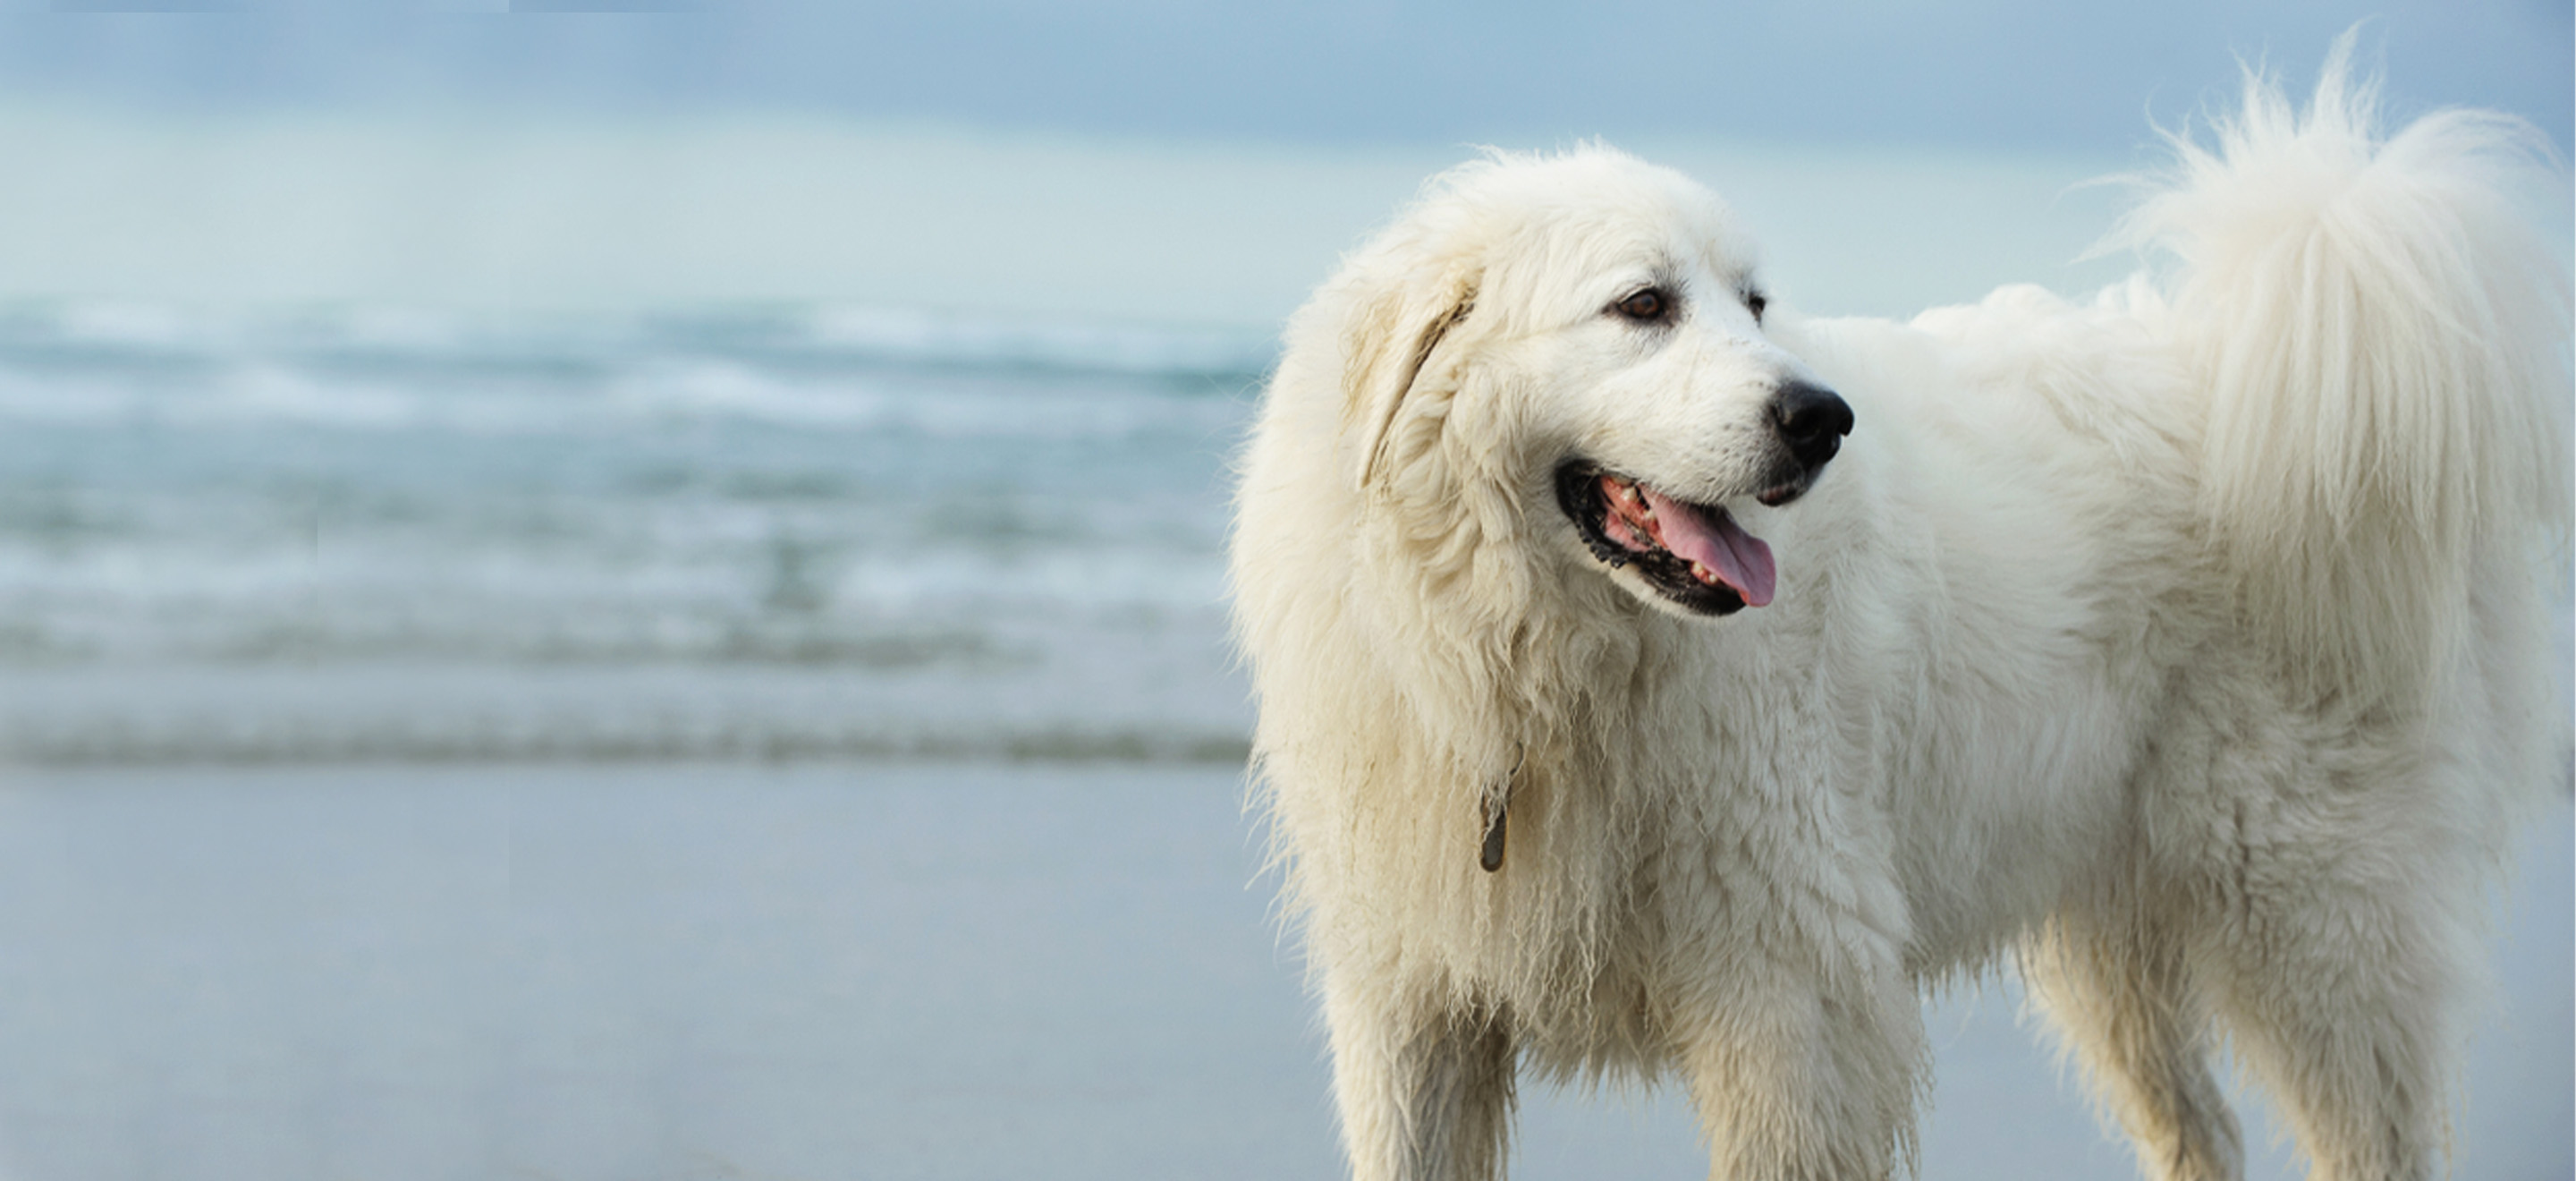 Great Pyrenees pup at the beach image